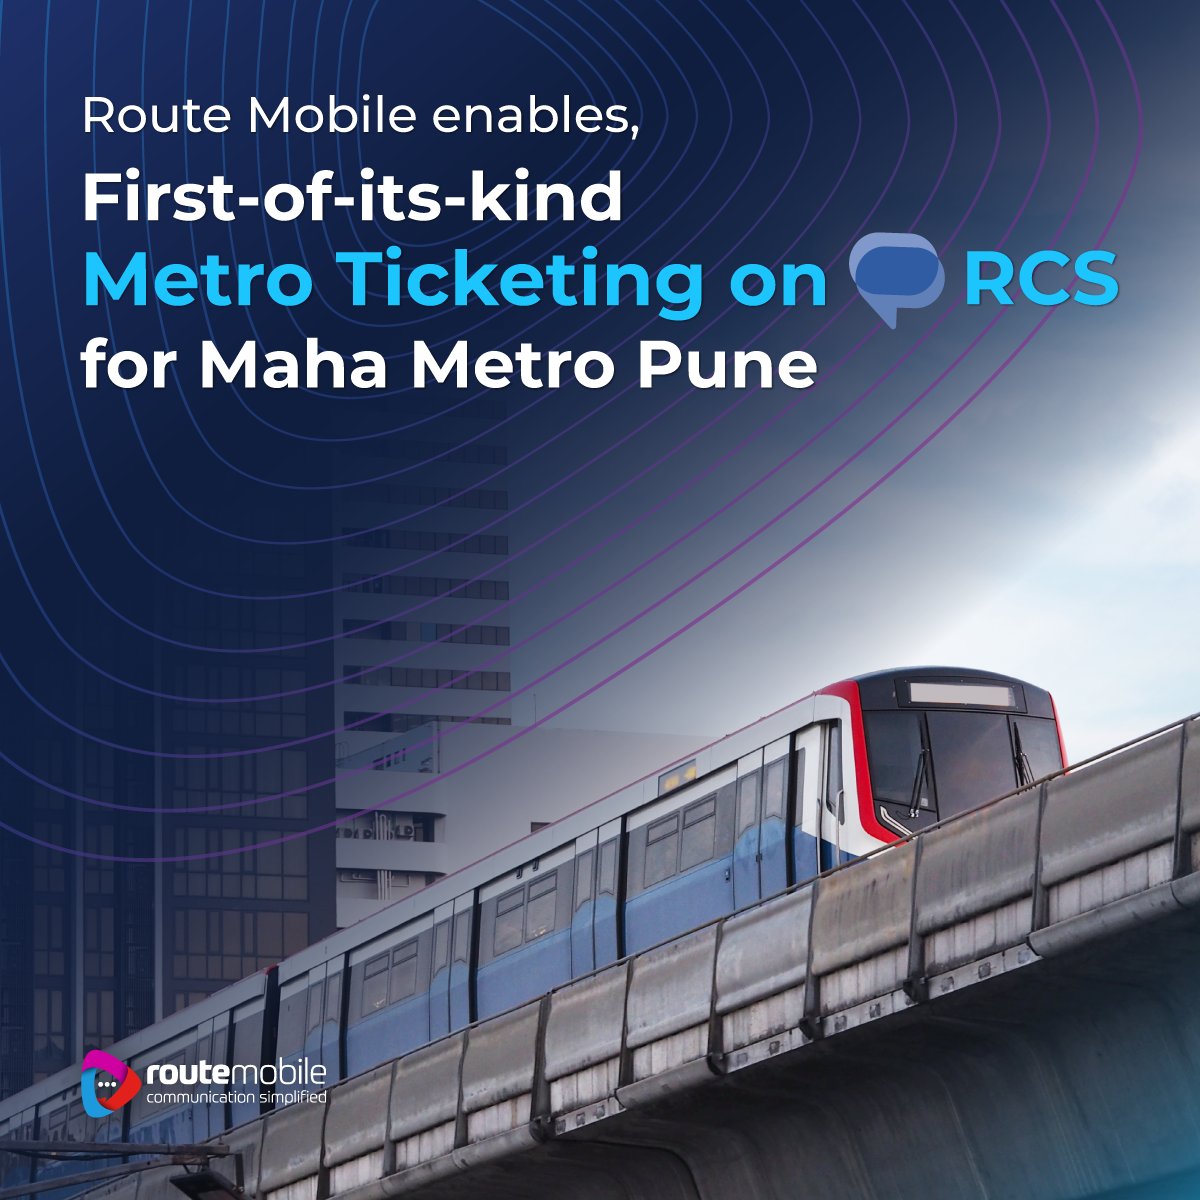 We are excited to roll out first of it's kind Metro ticketing on #RCS Business Messaging for Maha Metro Pune.

Commuters can simply scan the QR code on stations. Chat with the official Maha Metro account.

#conversationalcommerce
(1/3)